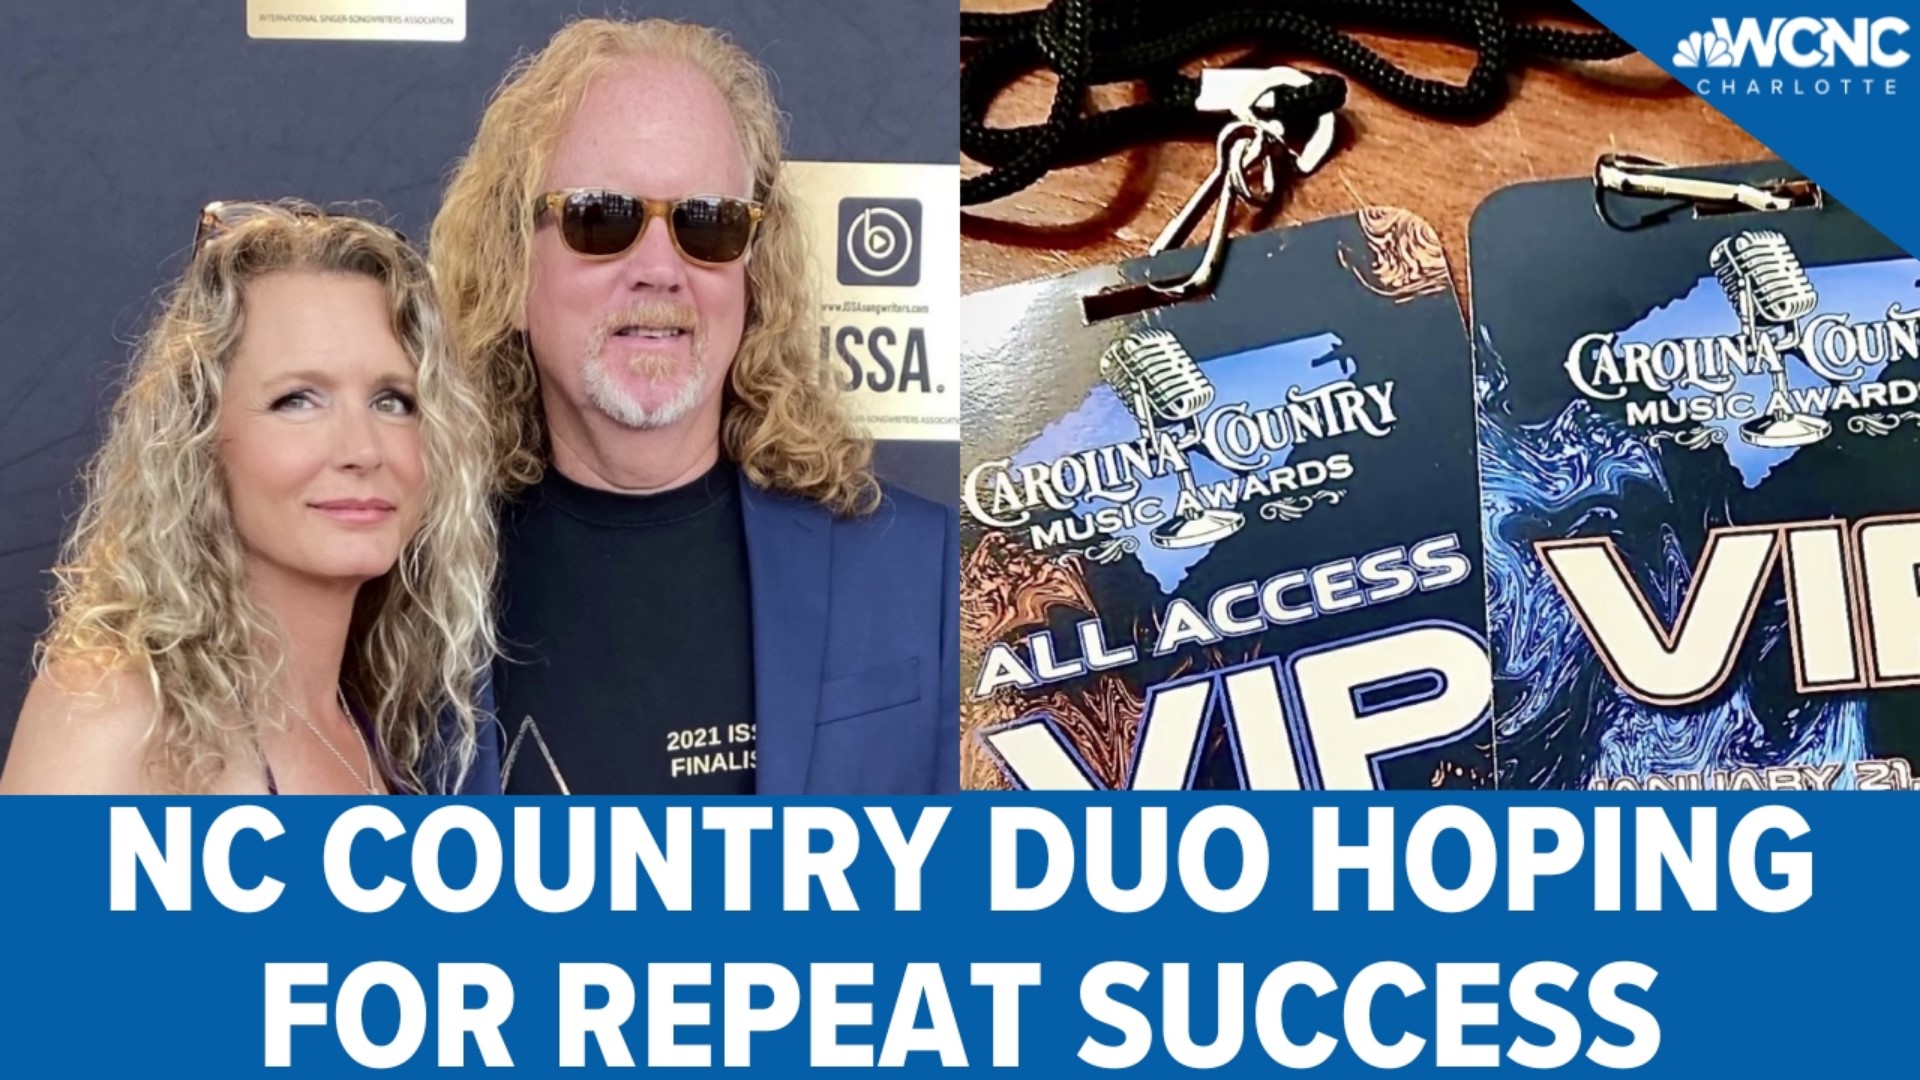 The couple was nominated for "Duo of the Year" for the third year in a row and "Country Tour of the Year" for the Carolina Country Music Awards.